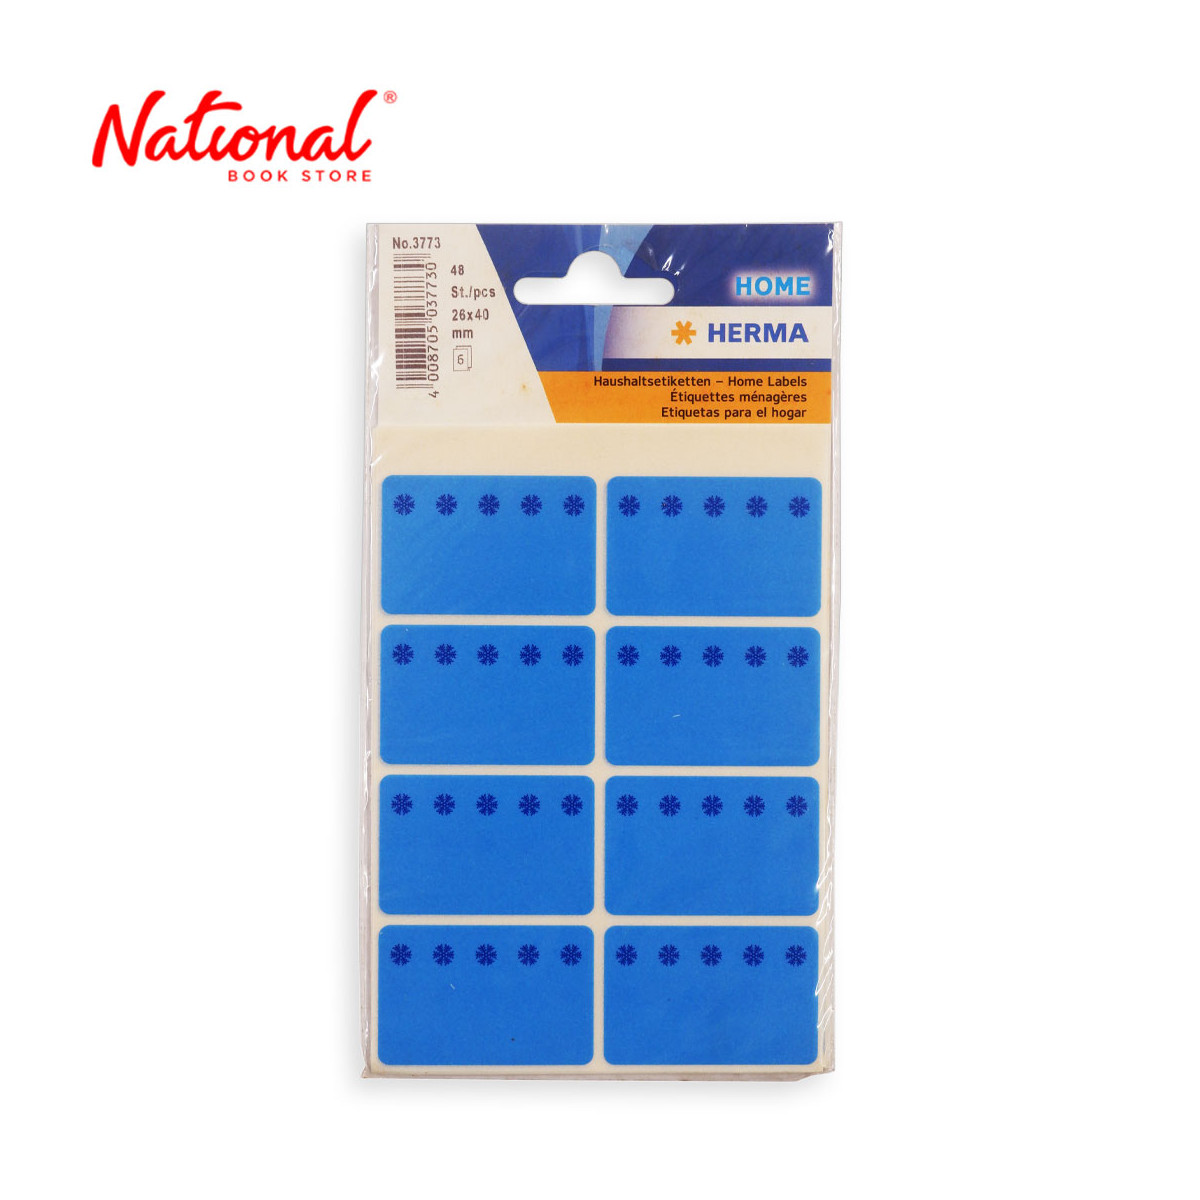 Herma Label Sticker 3770 6 Sheets 48's Labels Deep Freeze, Blue - Stationery - Filing Accessories